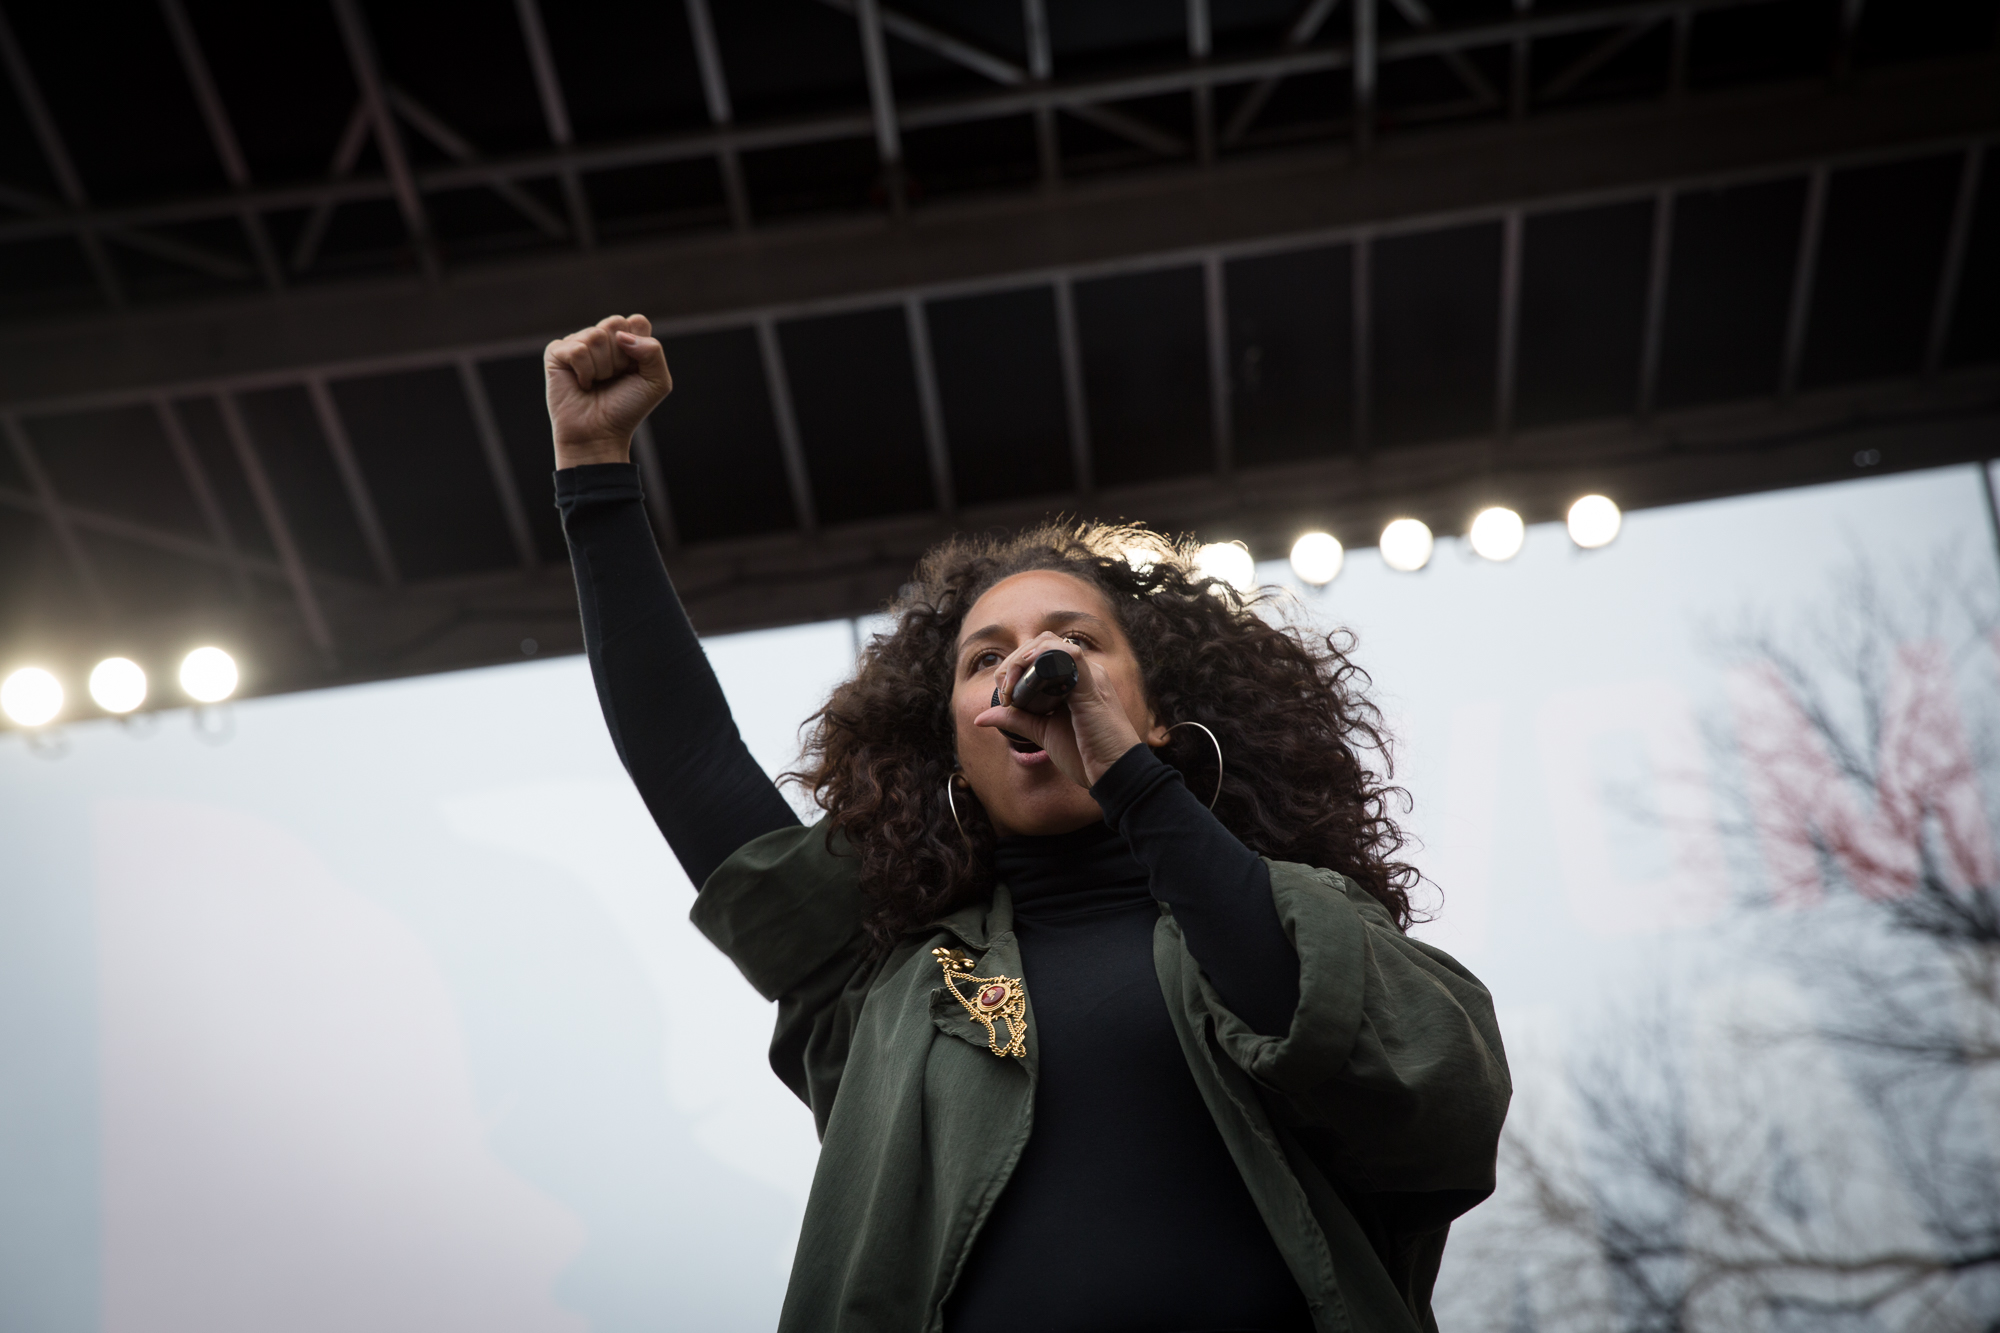  Alicia Keys on stage at the Women’s March on Washington, Jan. 21, 2017.&nbsp;Photo Credit: Alex Arbuckle 